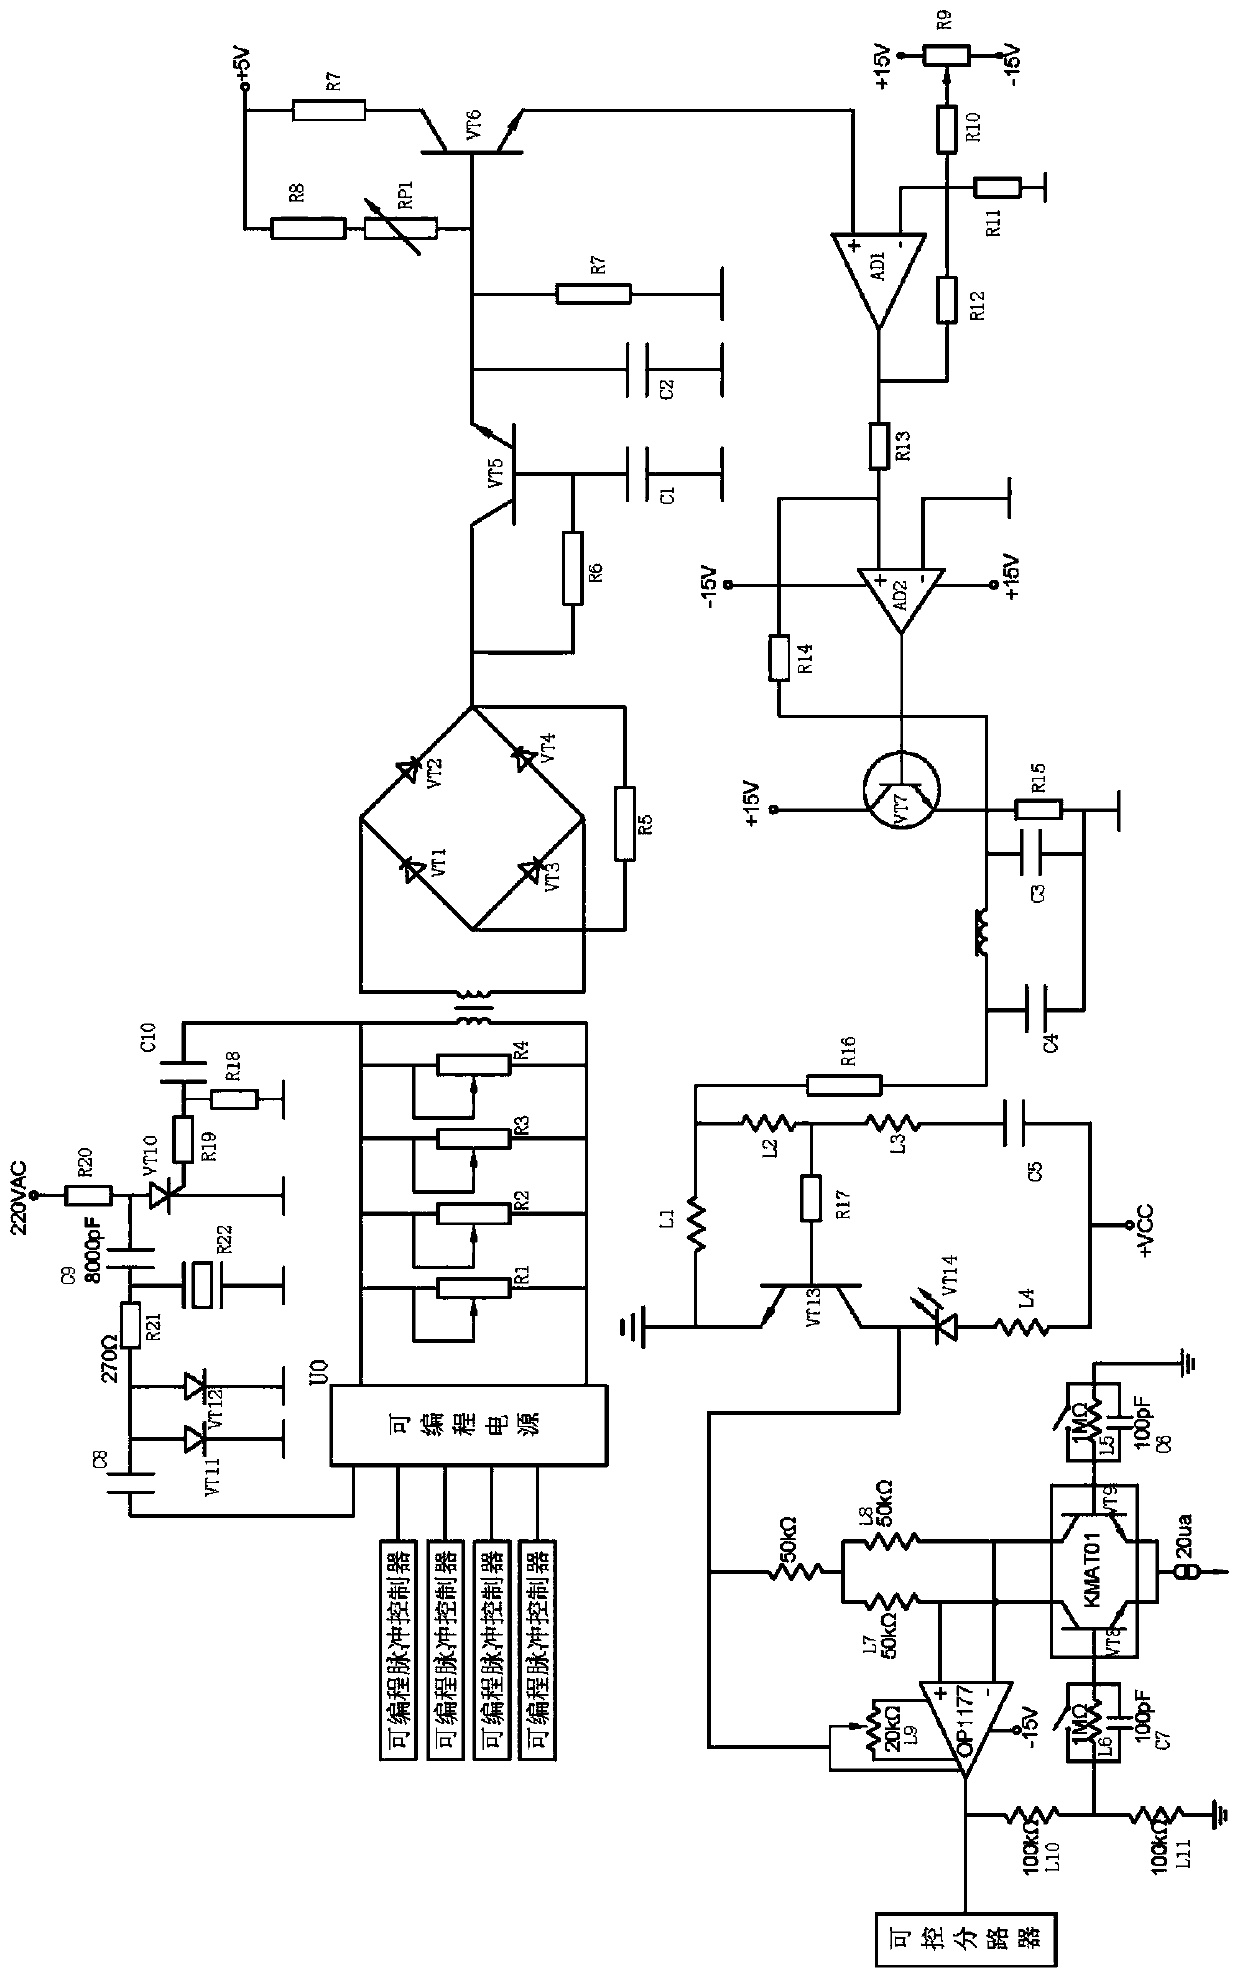 Automobile electronic and electrical performance test circuit system